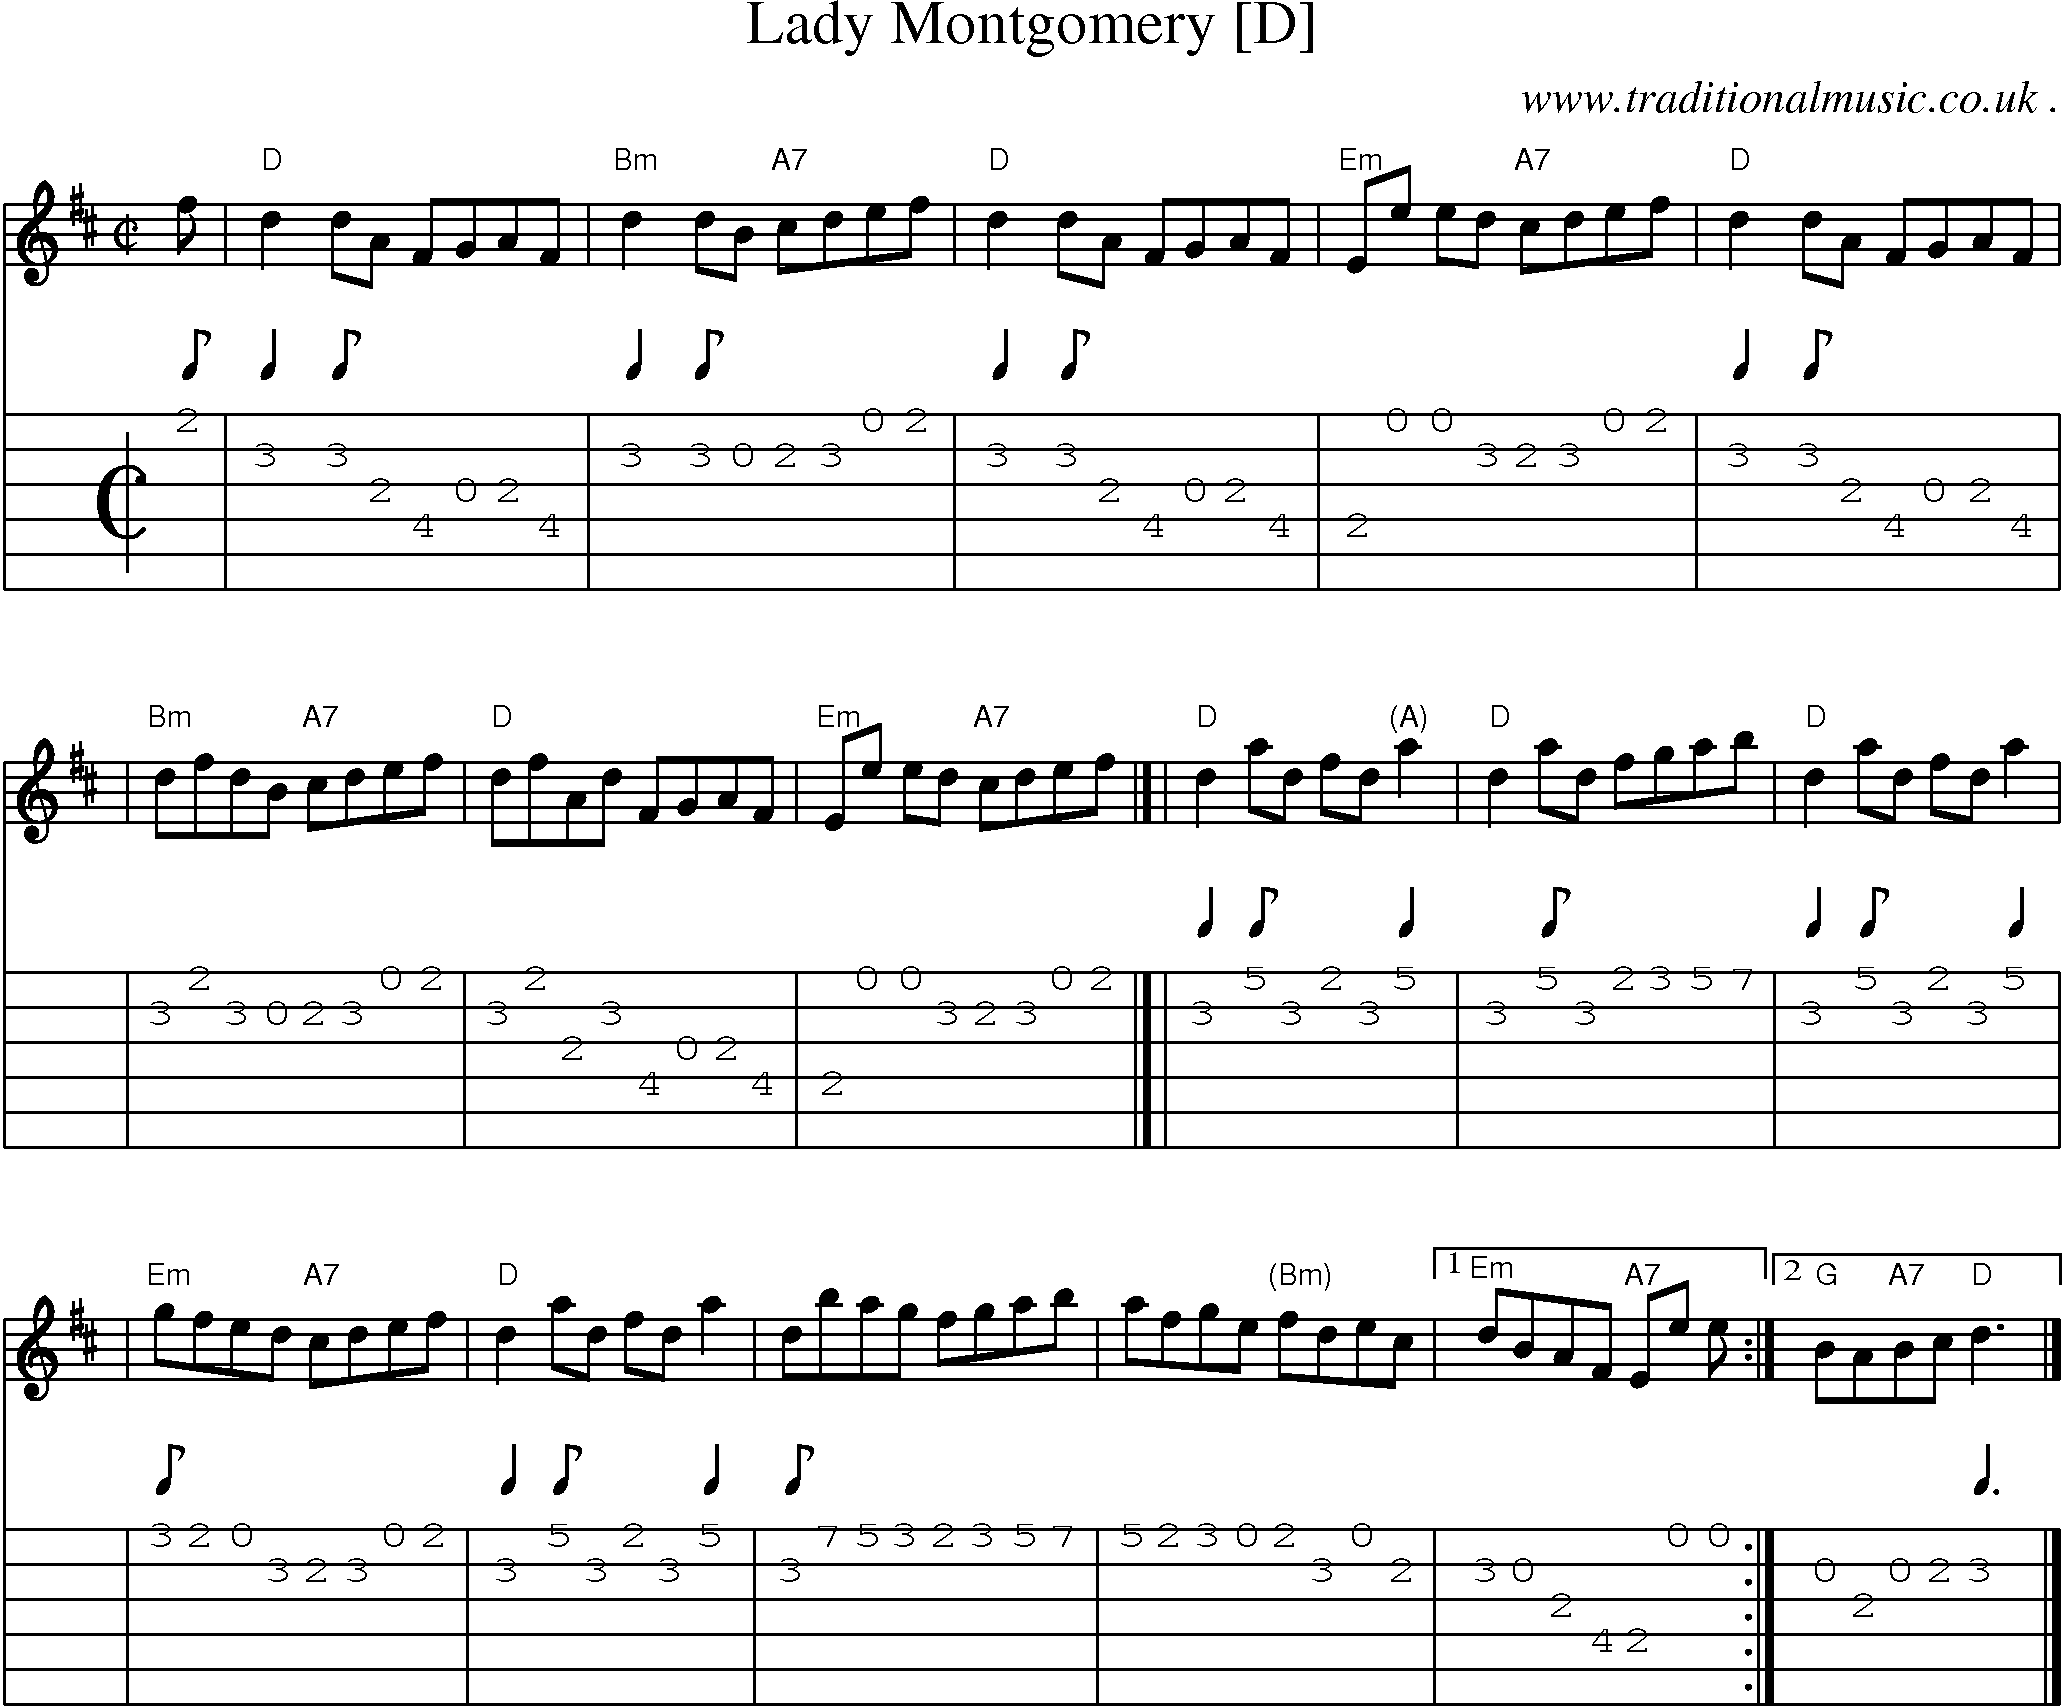 Sheet-music  score, Chords and Guitar Tabs for Lady Montgomery [d]